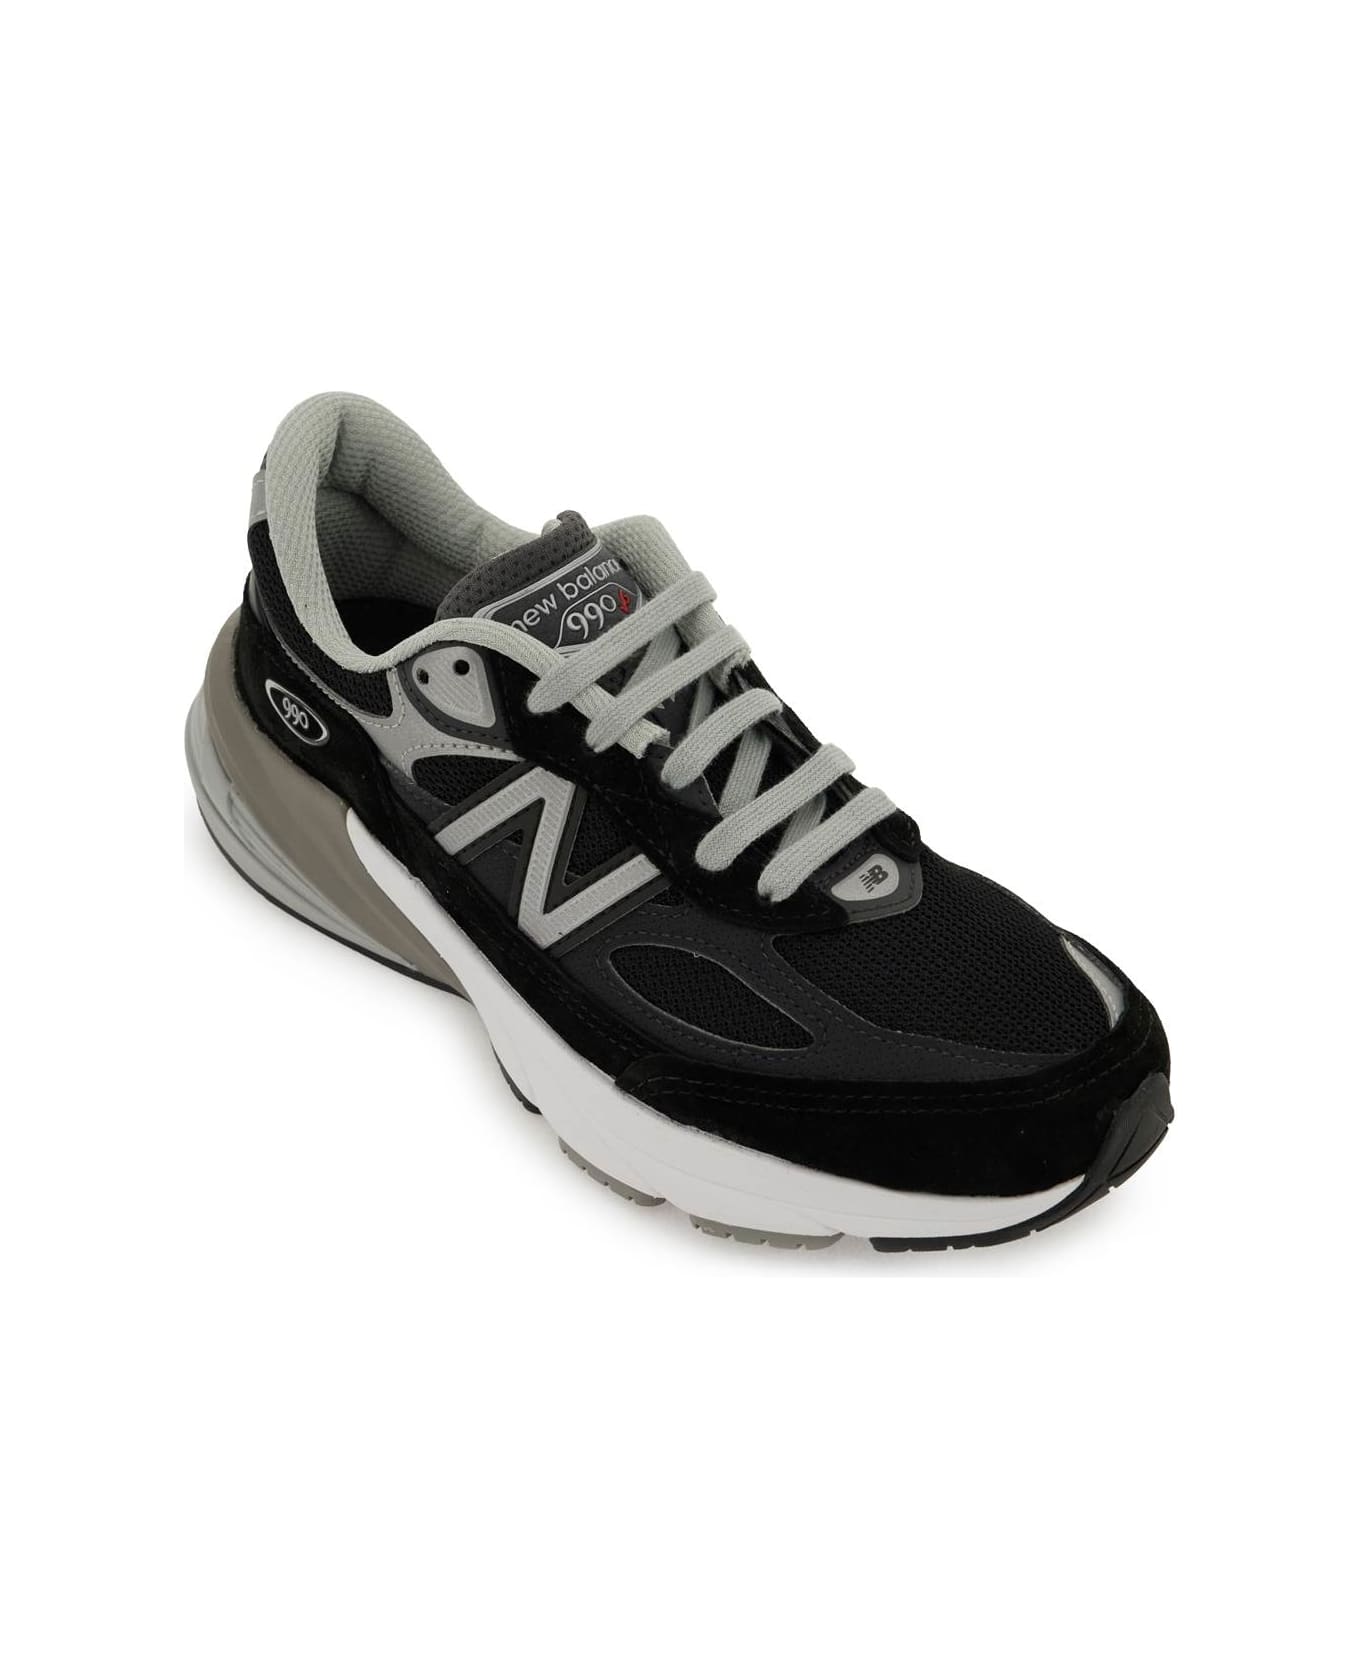 New Balance Made In Usa 990v6 Sneakers - BLACK (Grey)